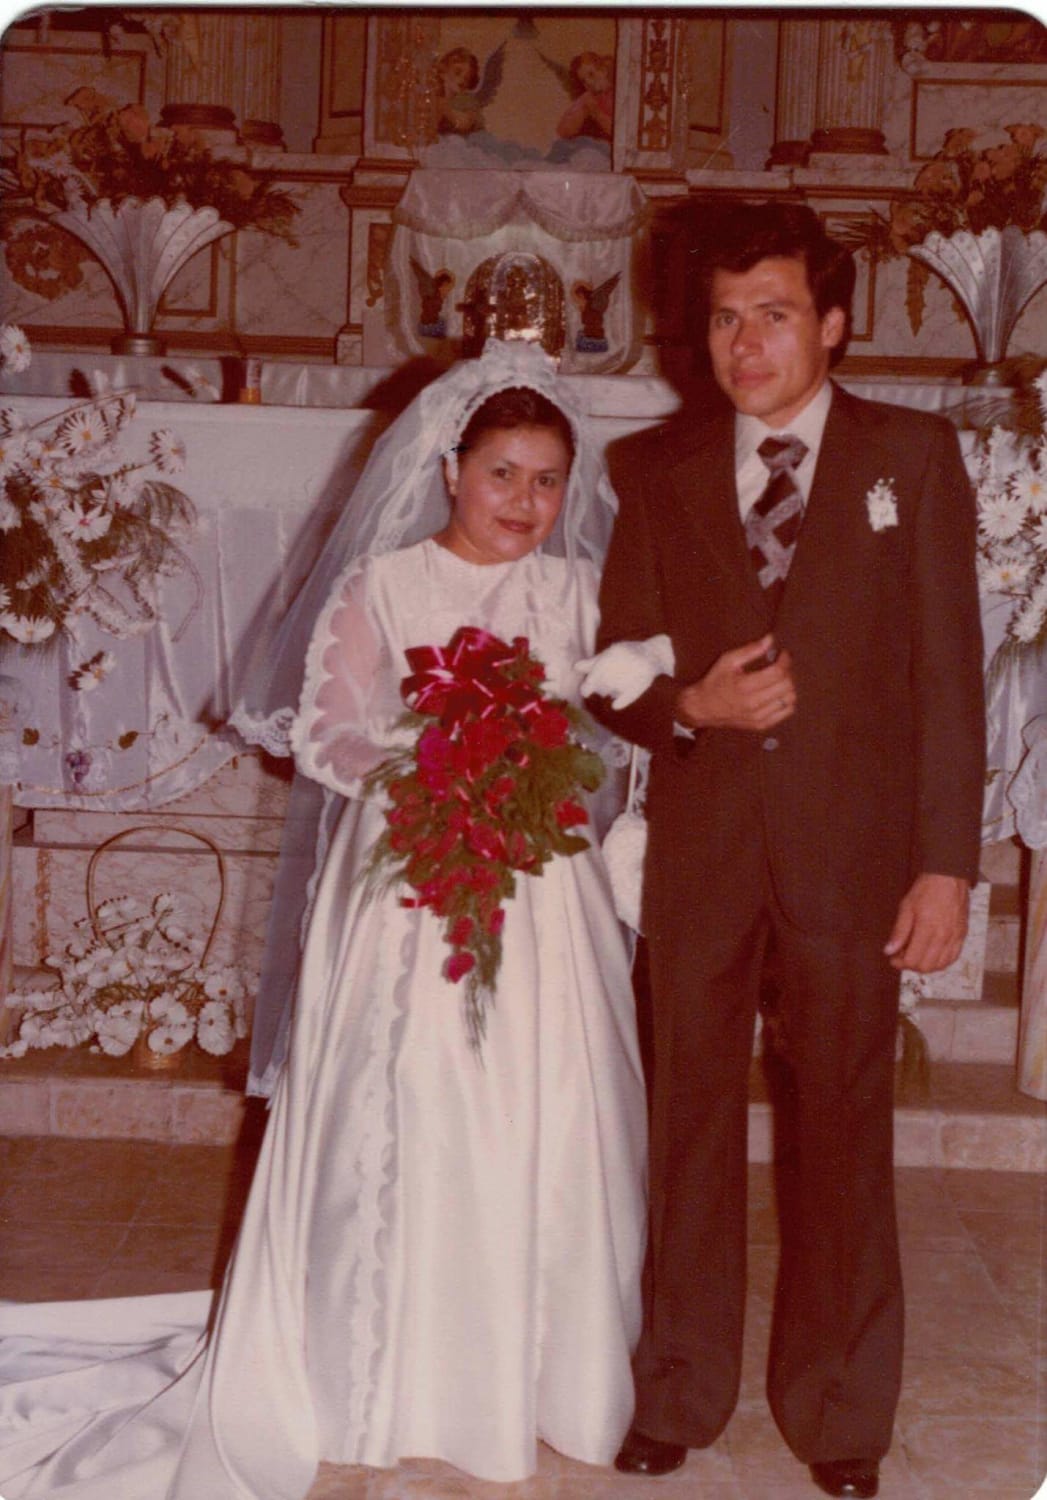 Mom and dad on their wedding day. December 16, 1978 in Tonacatepeque, El Salvador. They're the best people I know.